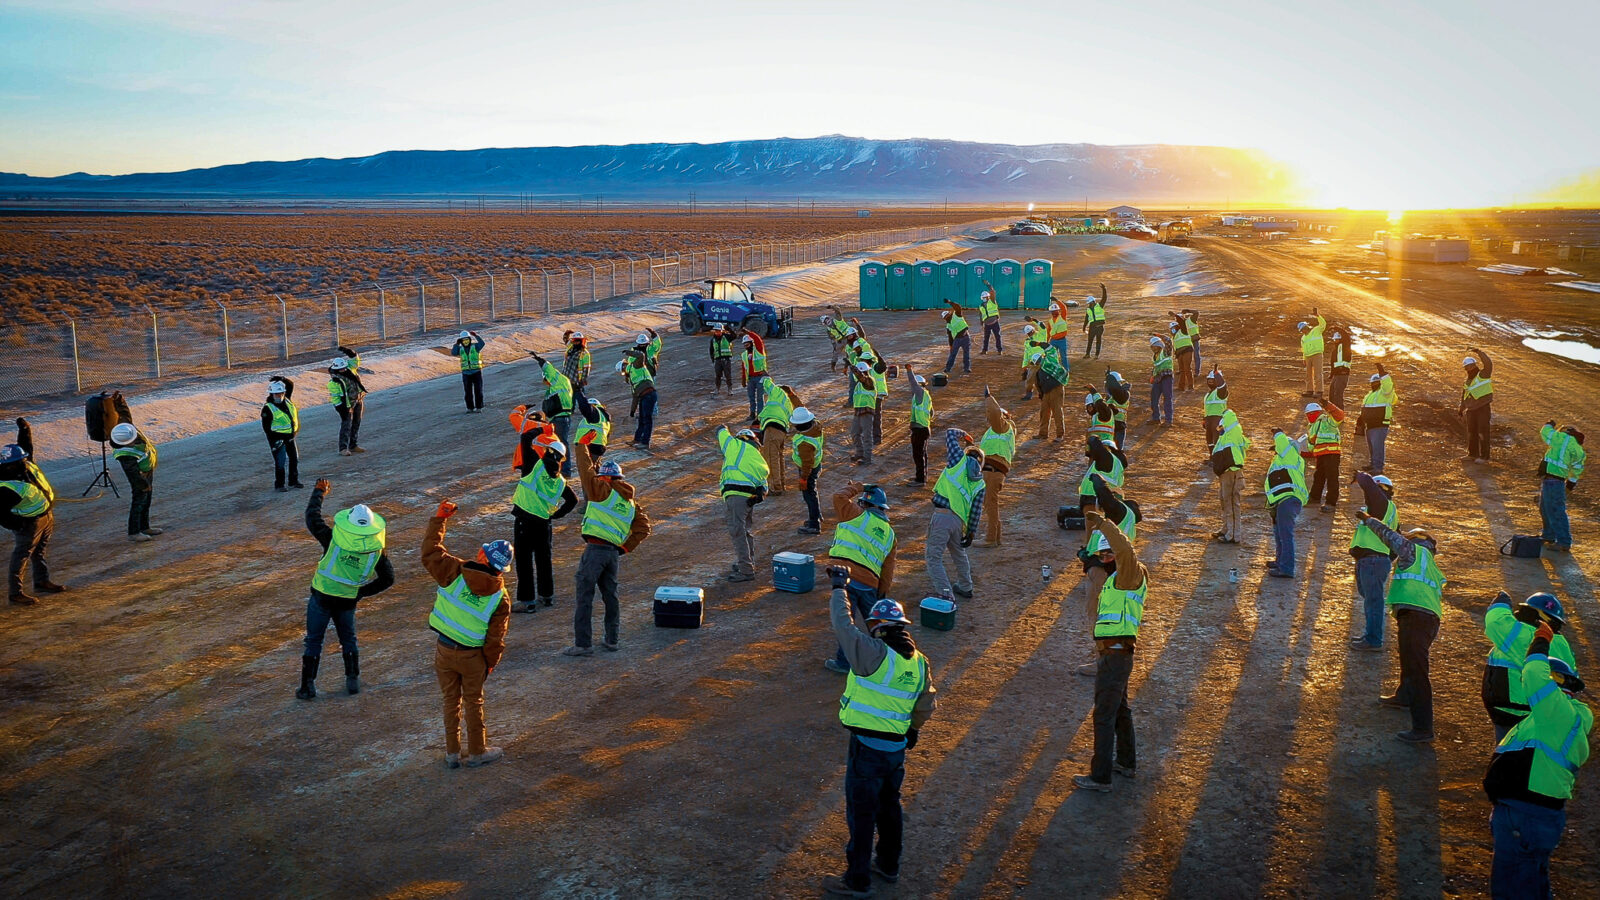 Group of ͵E Energy employees stretching prior to work